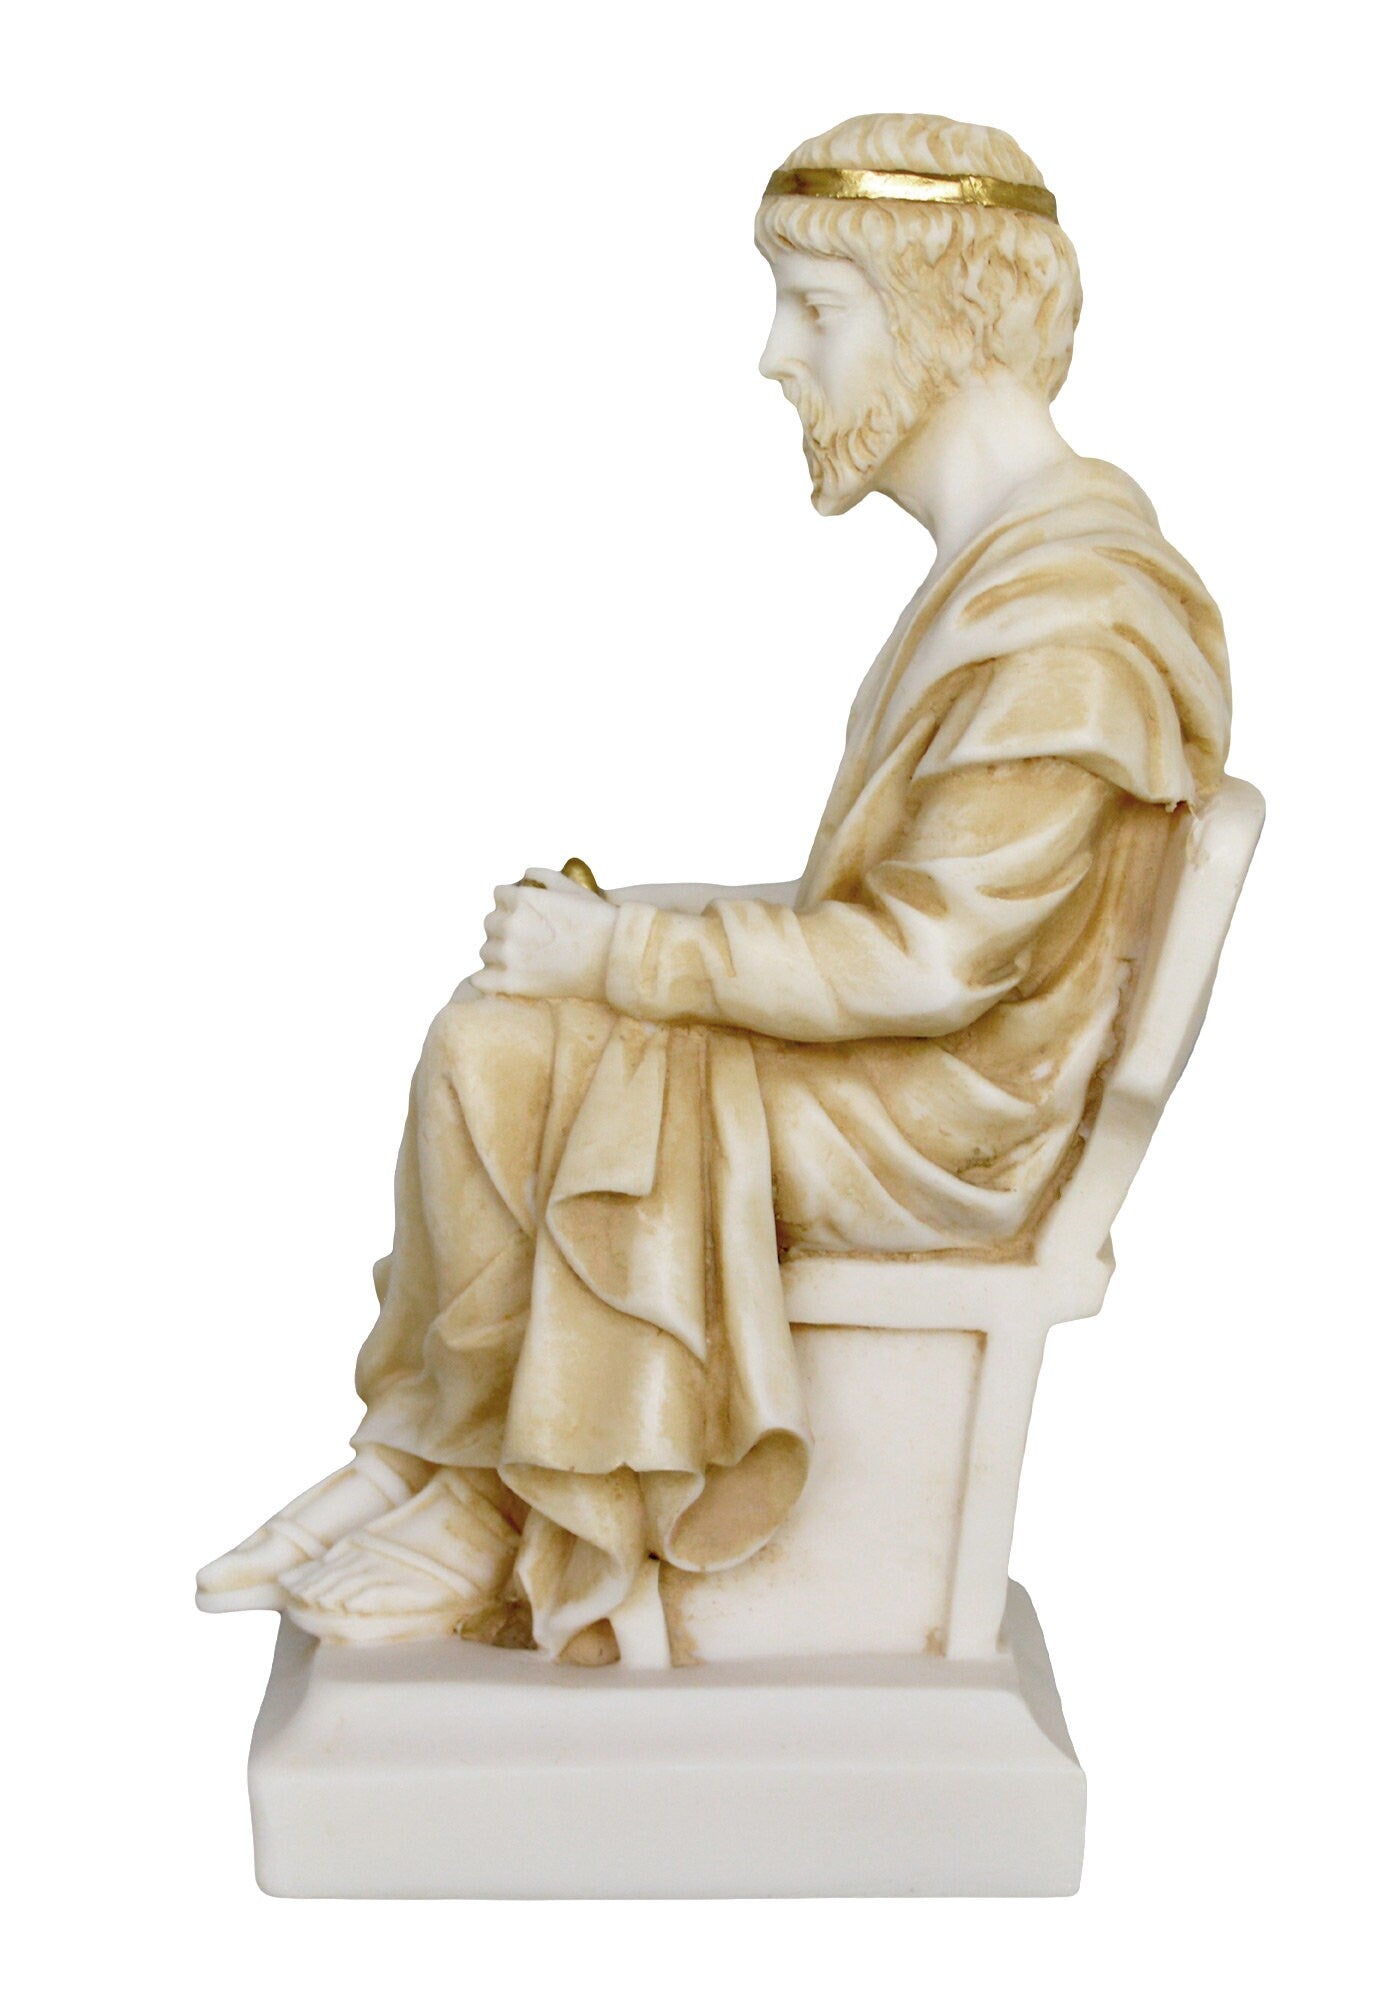 Plato - Ancient Greek Philosopher - 428-348 BC - Student of Socrates, Teacher of Aristotle - Founder of the Academy - Aged Alabaster Statue